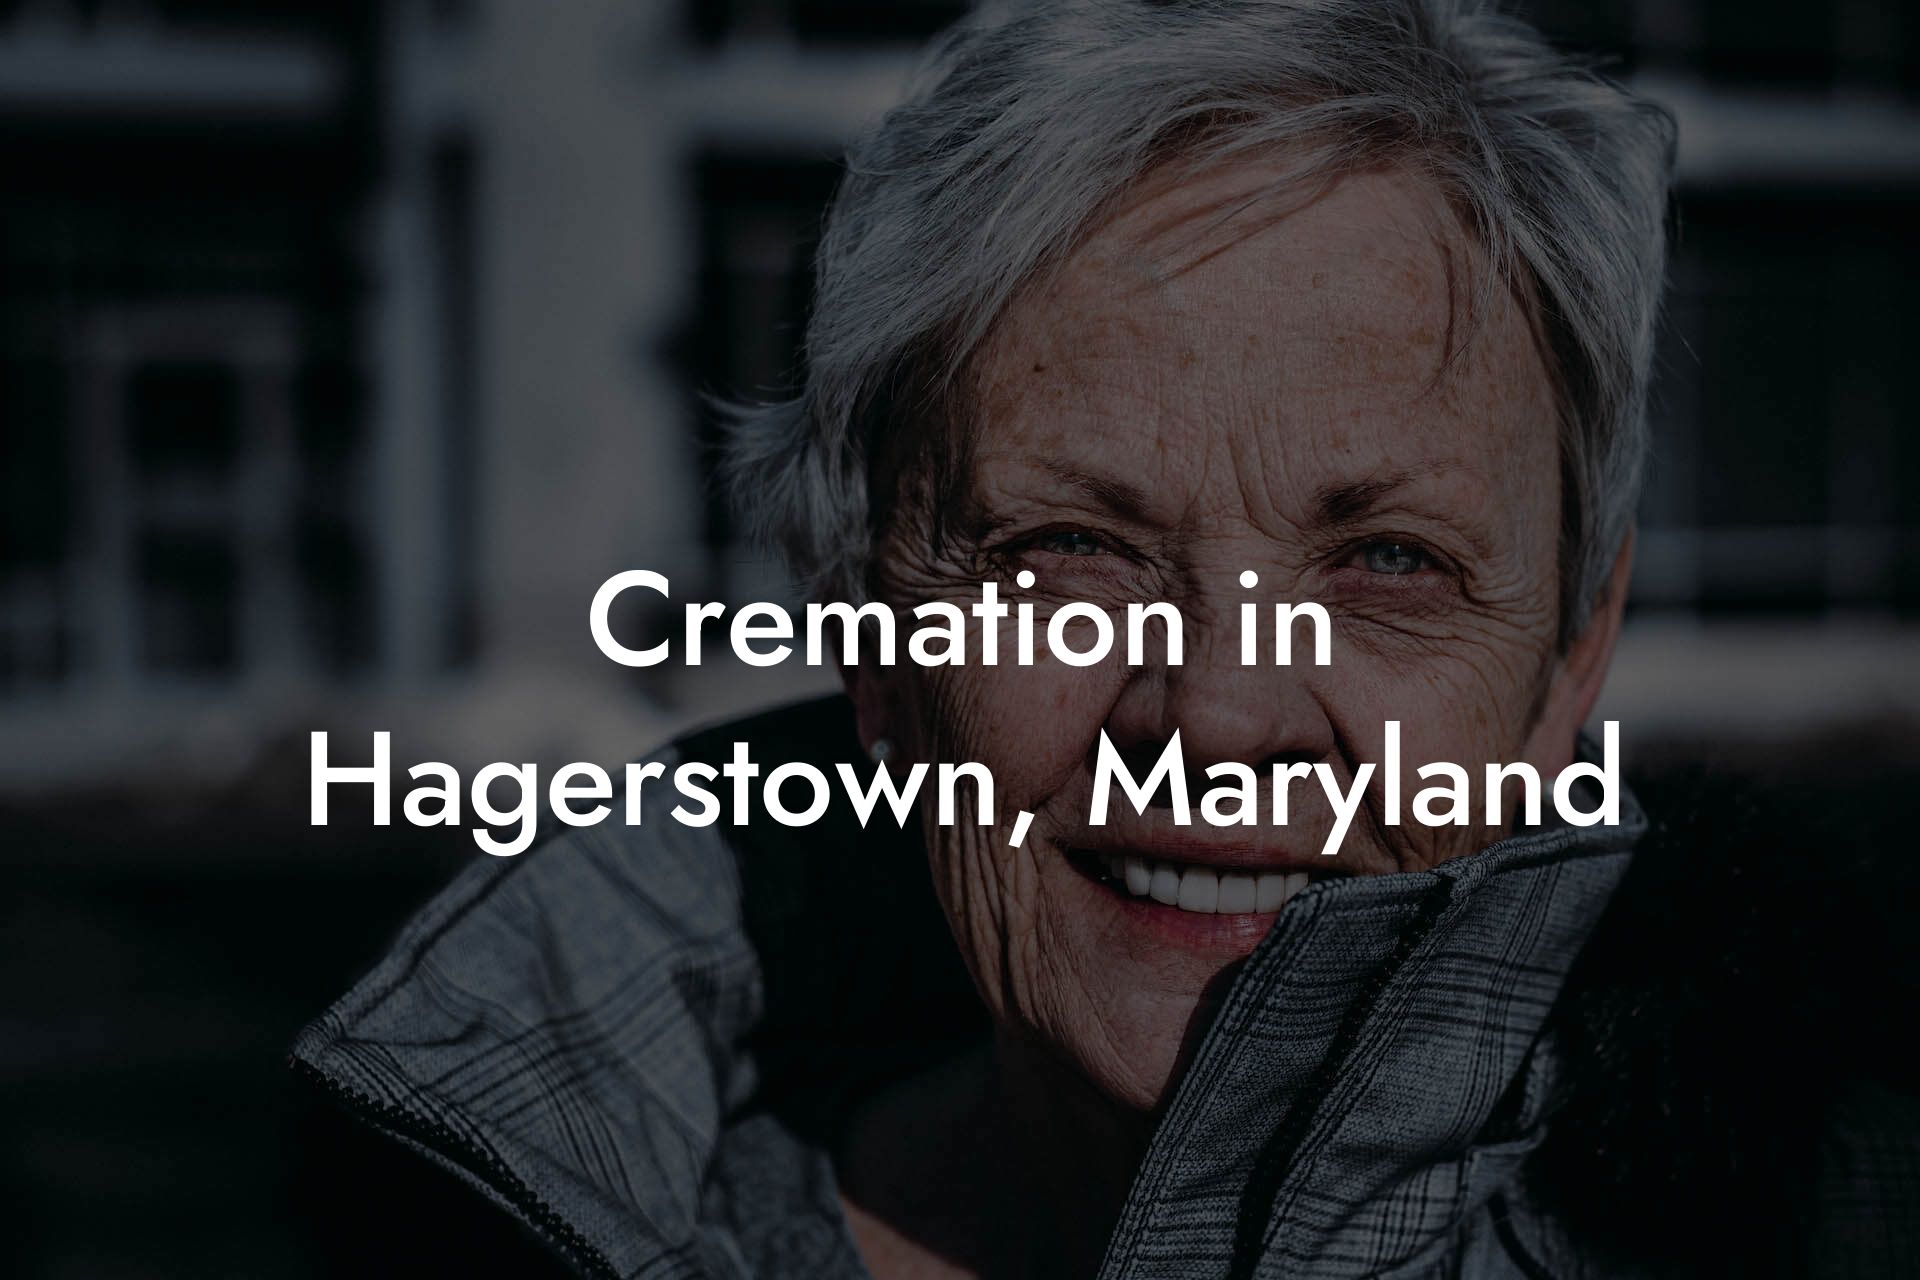 Cremation in Hagerstown, Maryland